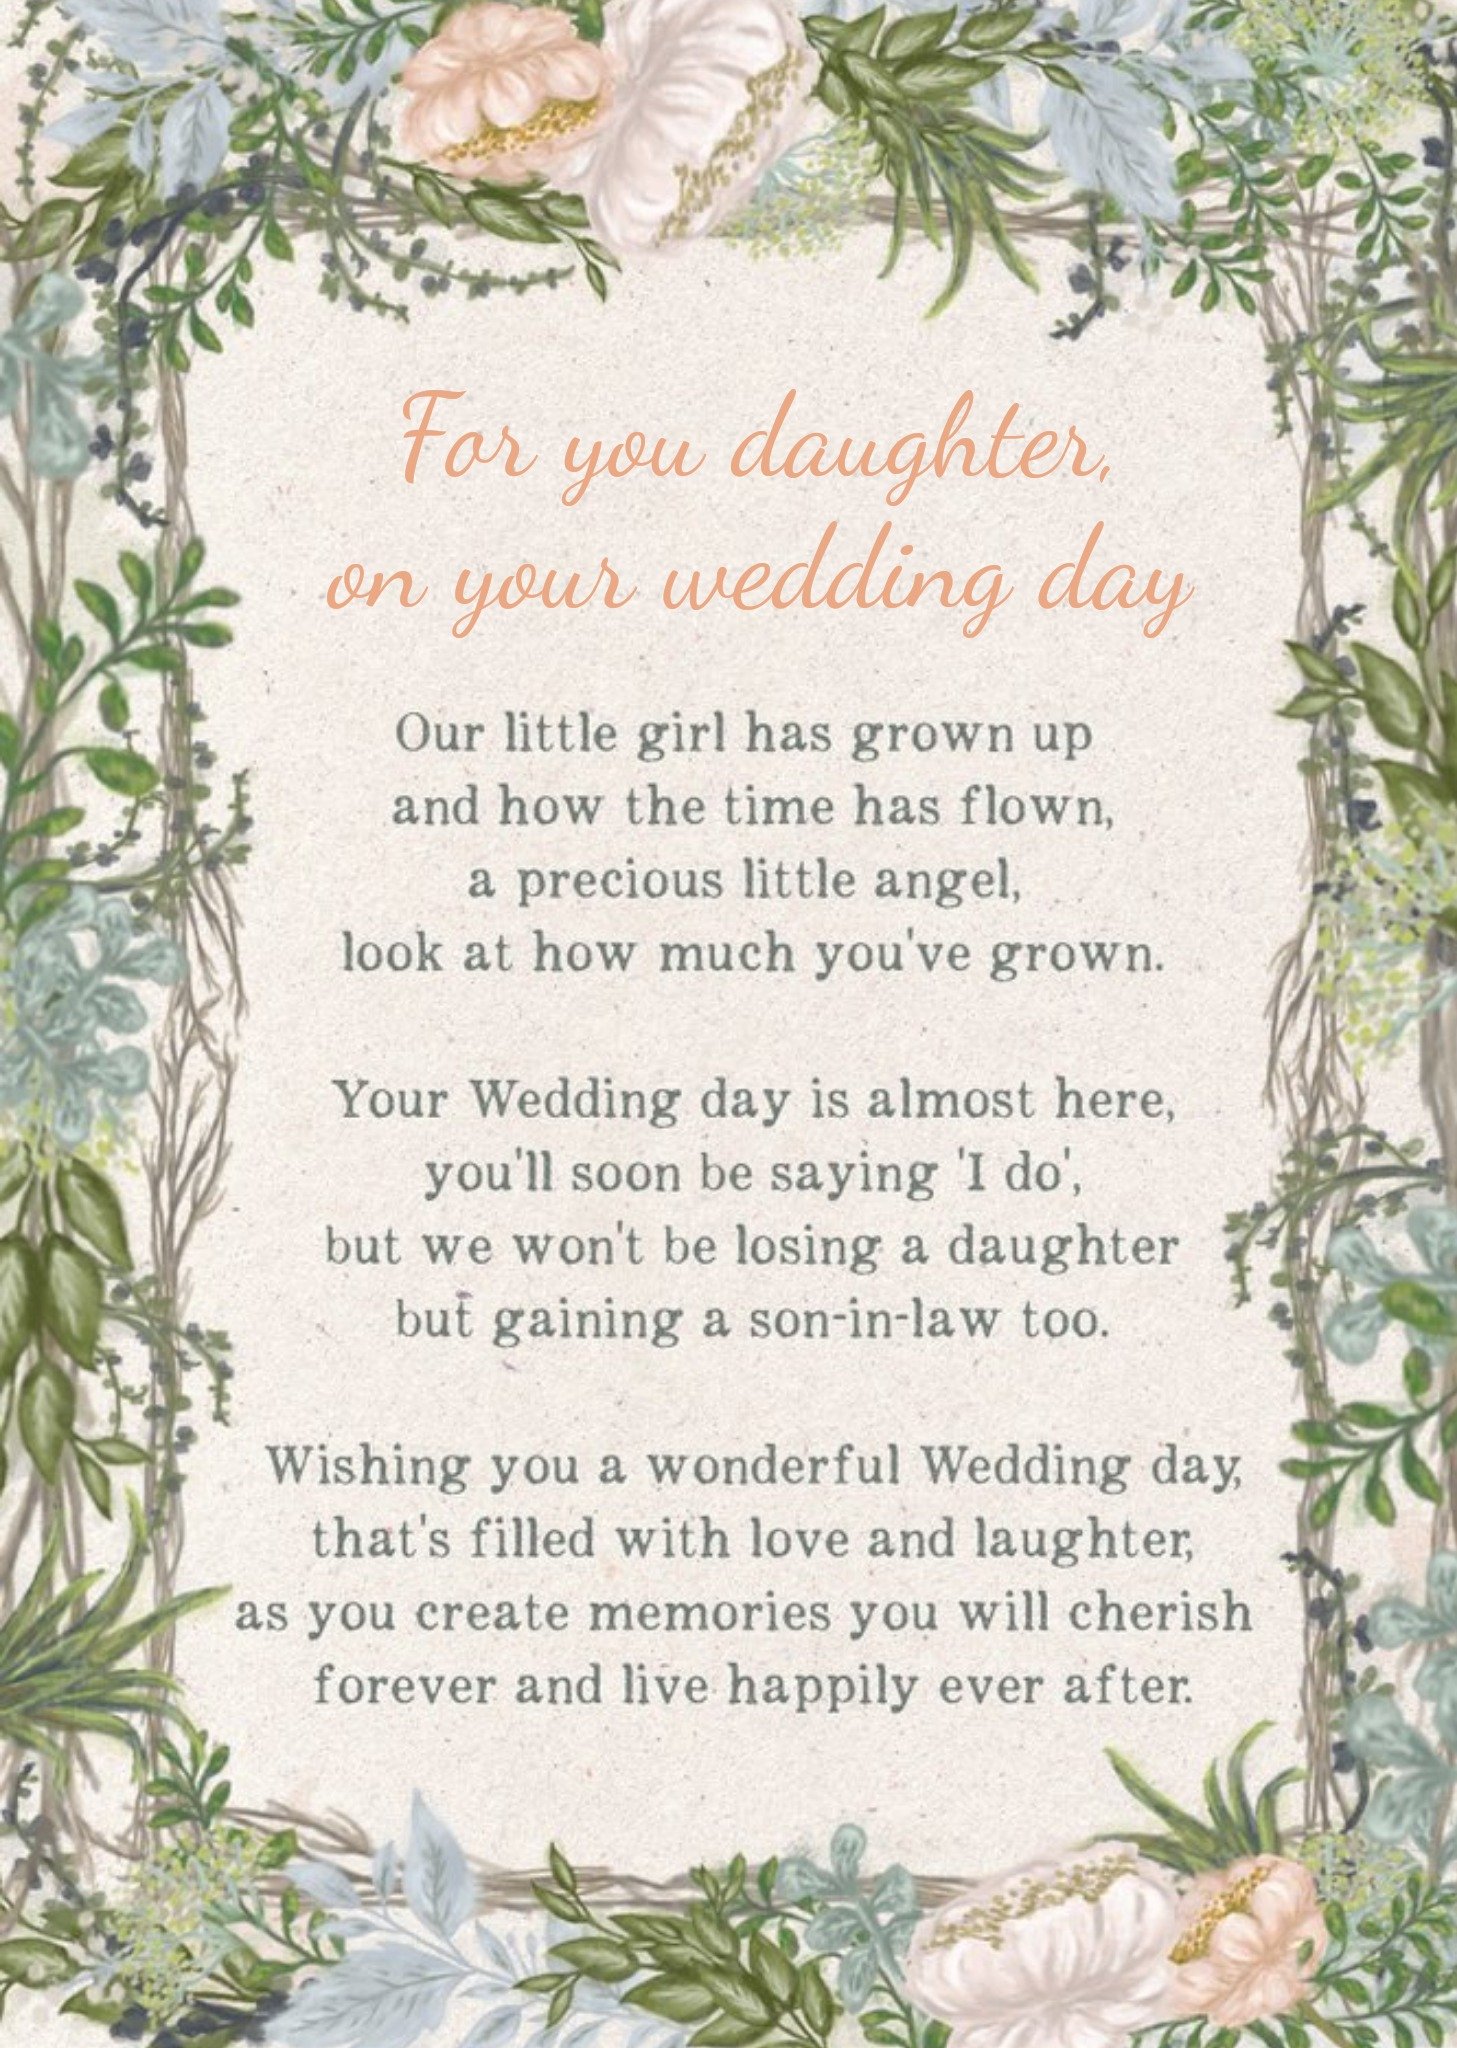 Moonpig Wedding Card - Verse - Daughter - Newly Weds - Floral, Large